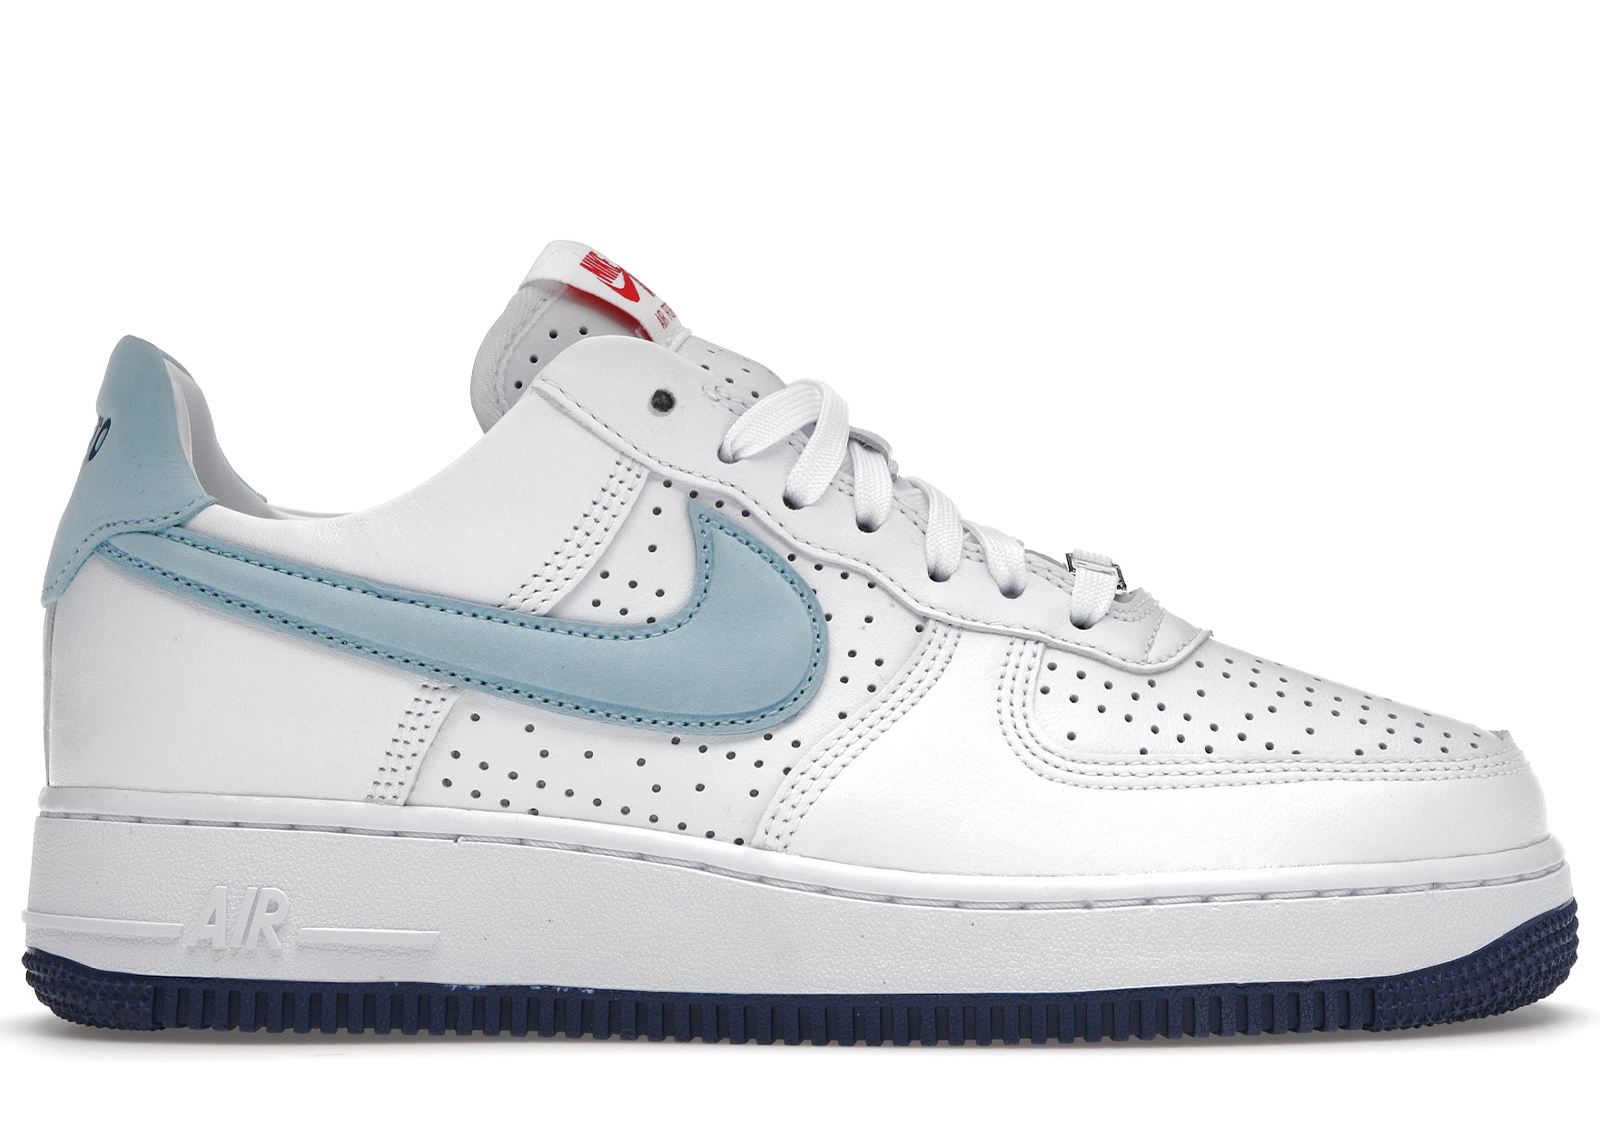 puerto rico air force 1 release date